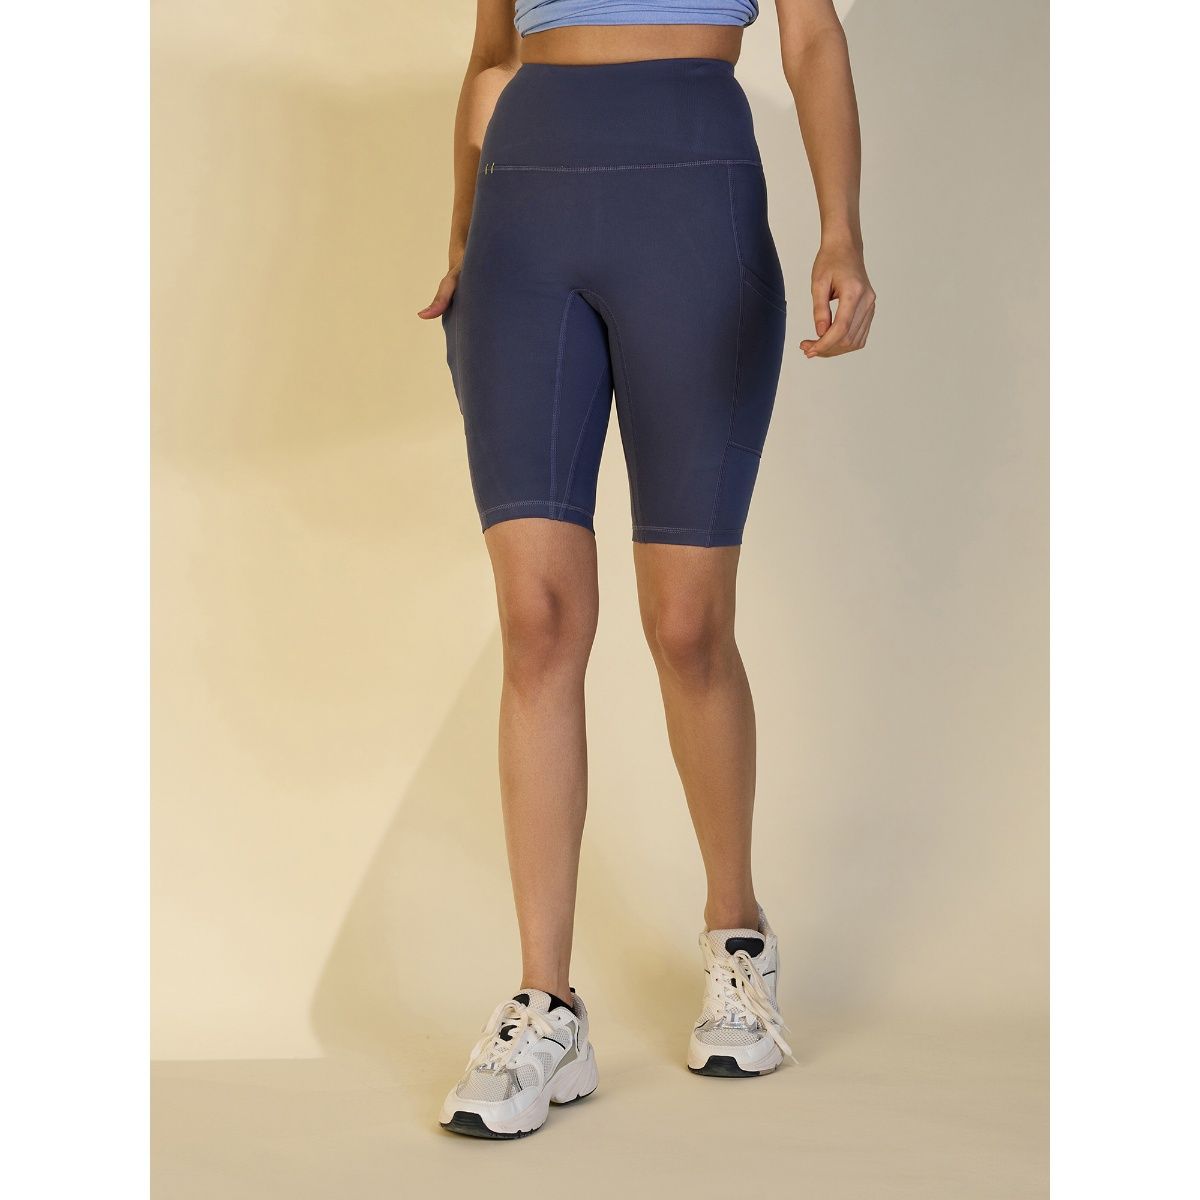 Plain Women Sky Blue Lycra Cycling Shorts, Small at Rs 65/piece in New Delhi